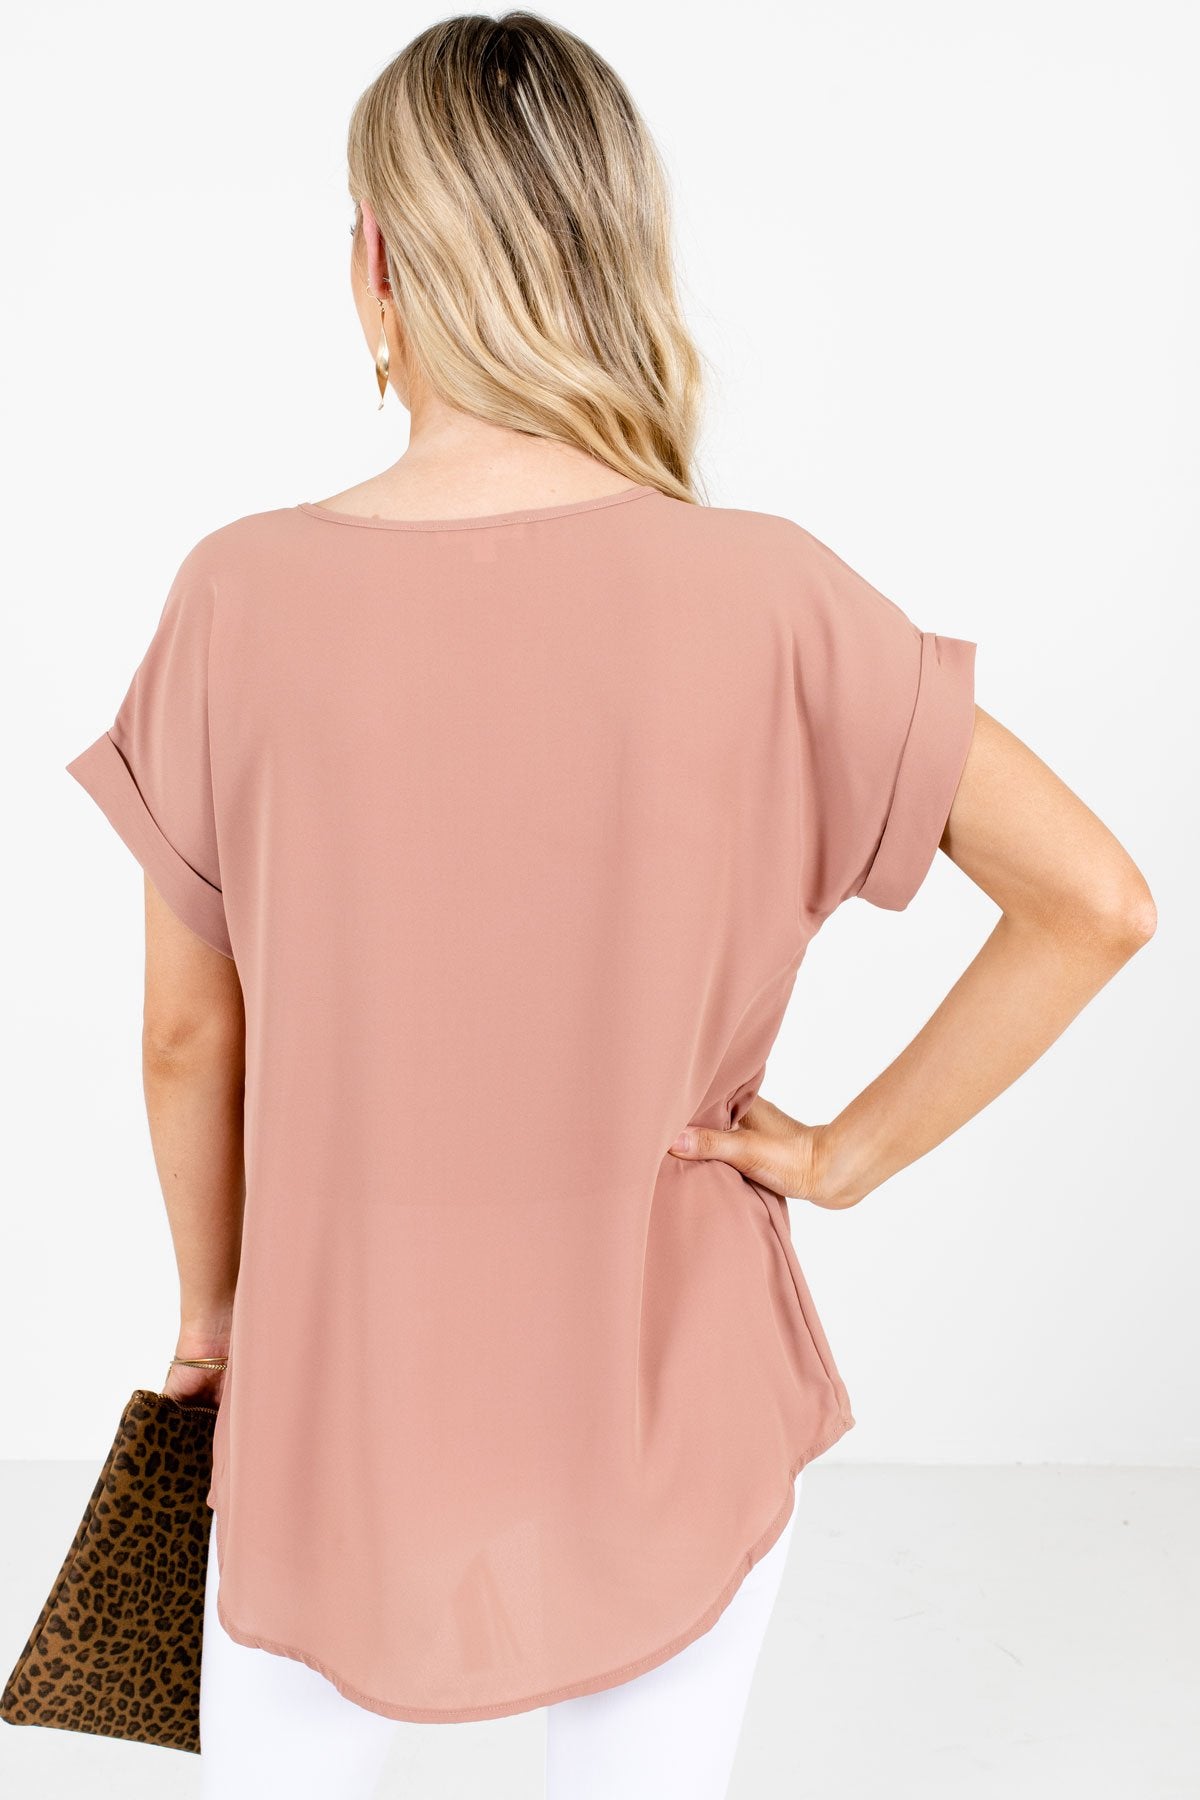 Women’s Tan Brown Cuffed Sleeve Boutique Blouse